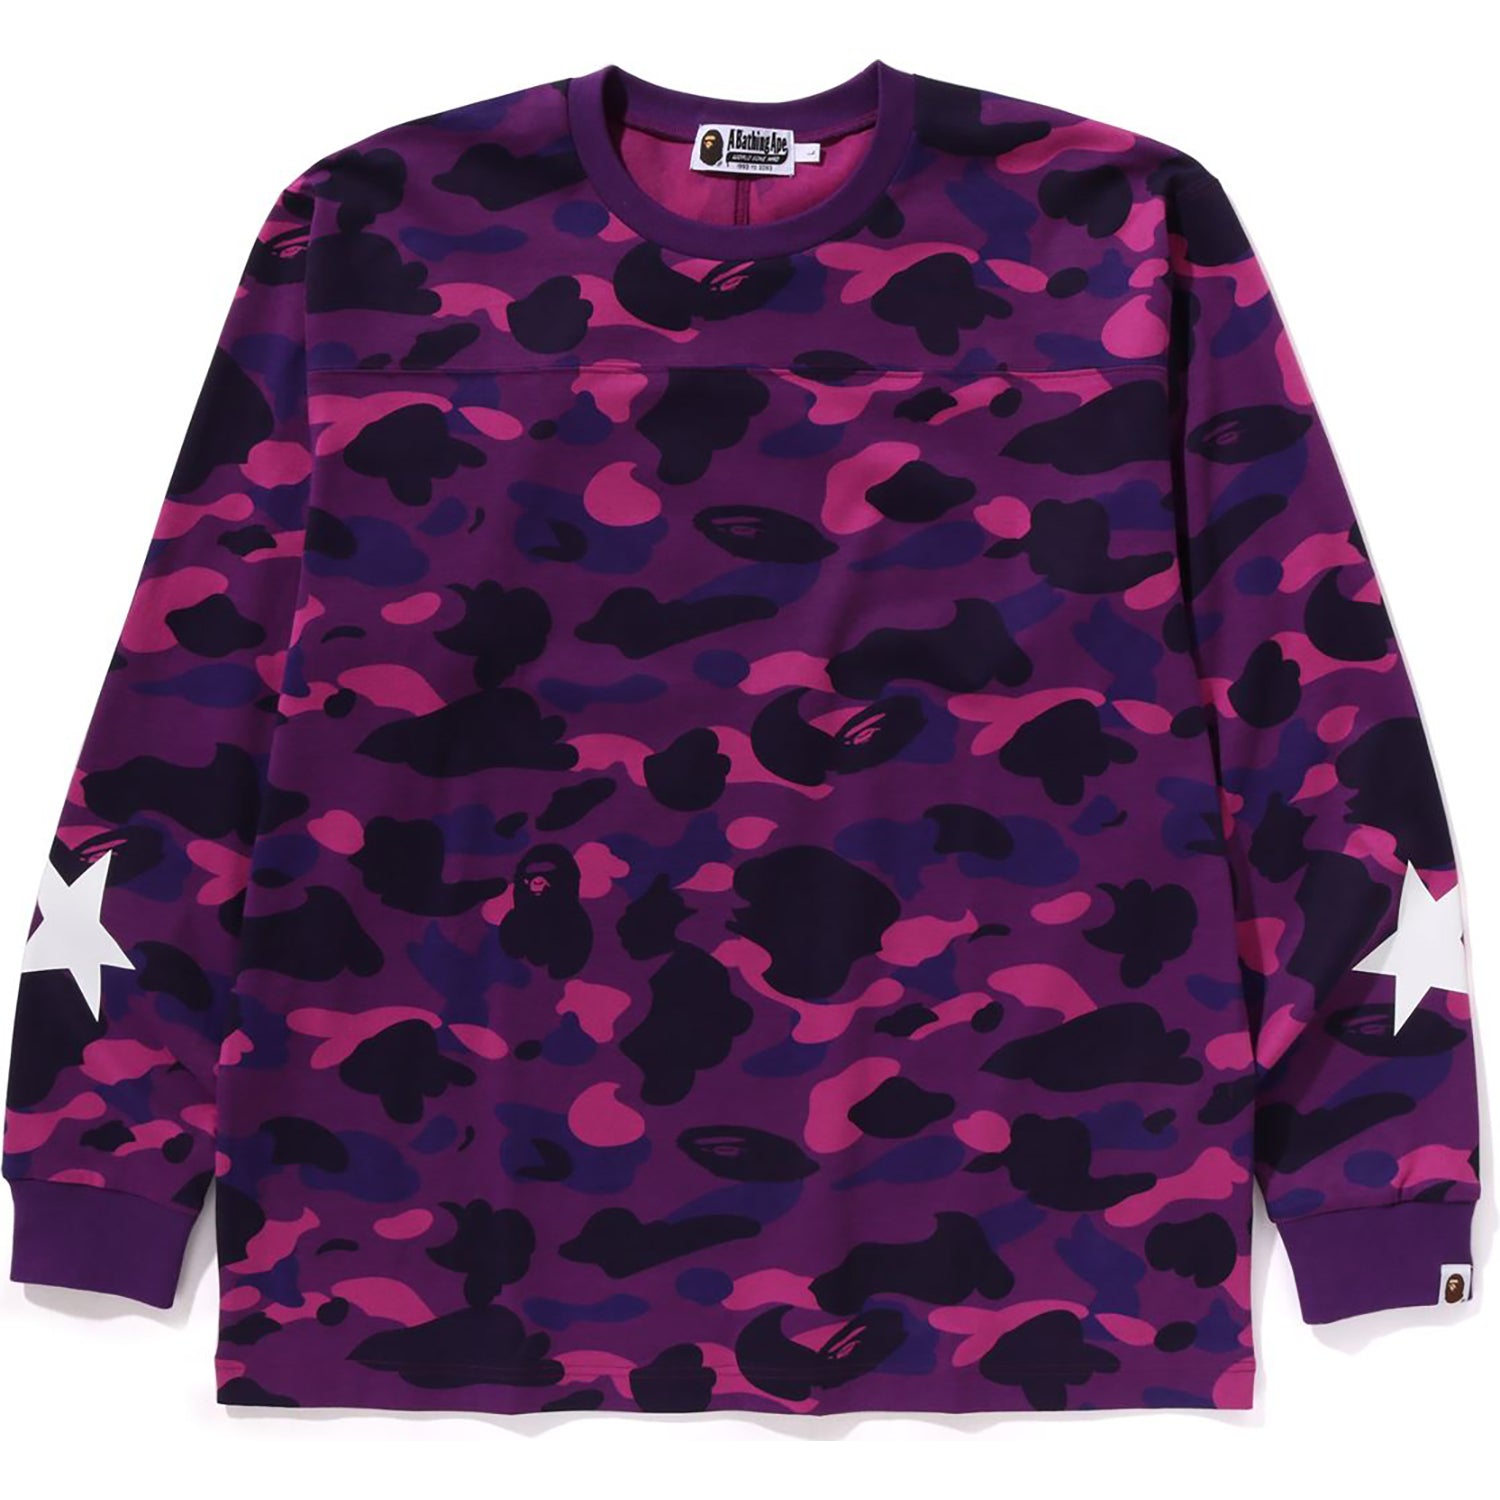 BAPE Ink Print Relaxed #1 L/S Tee Purple